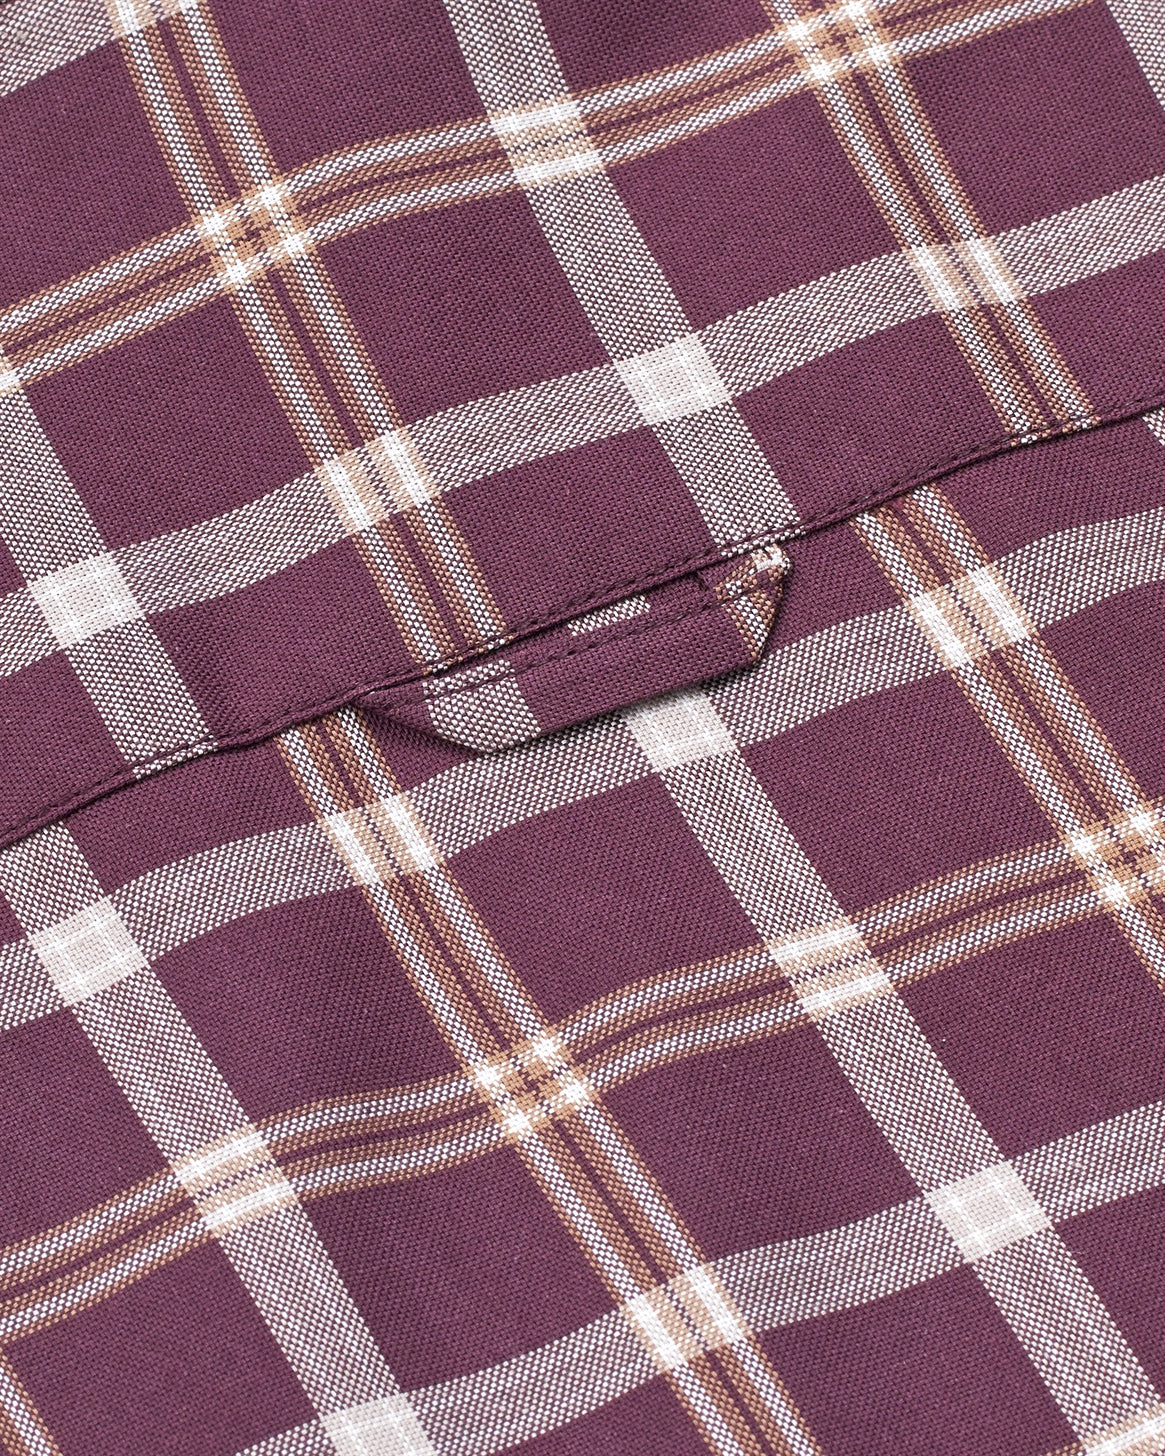 Bare Brown Cotton Check Shirt - Slim Fit with Full Sleeves - Wine